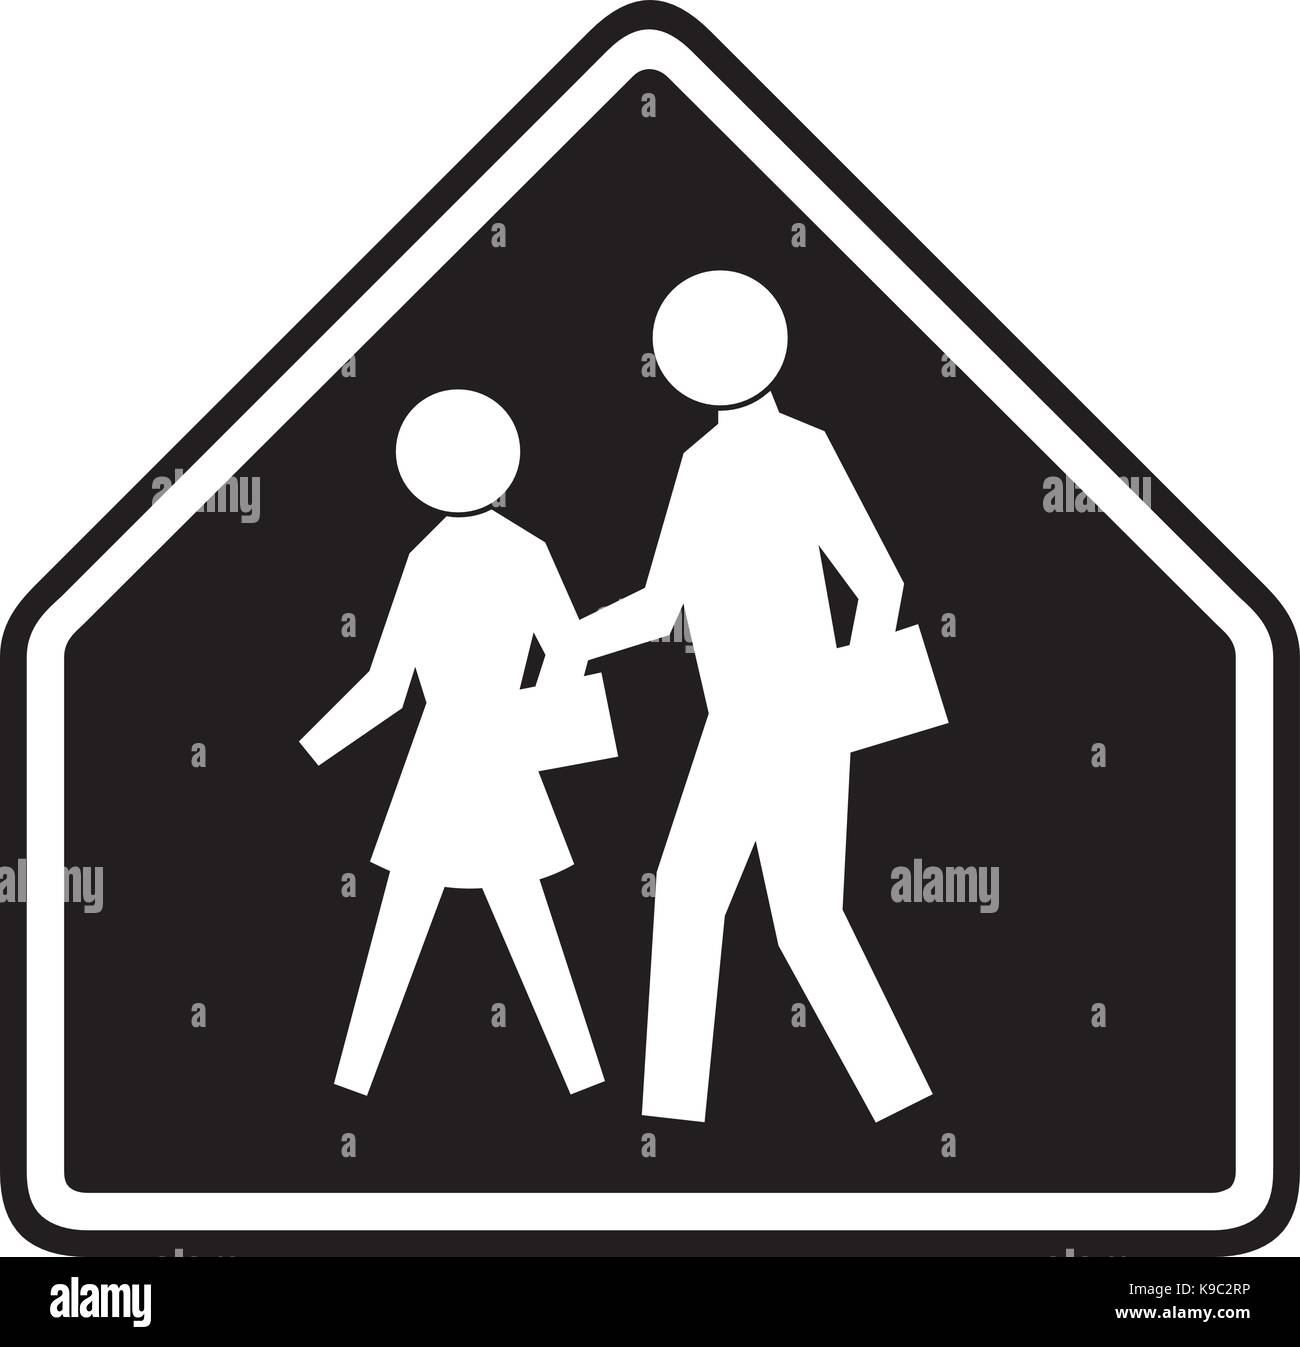 People crossing warning traffic sign Stock Vector